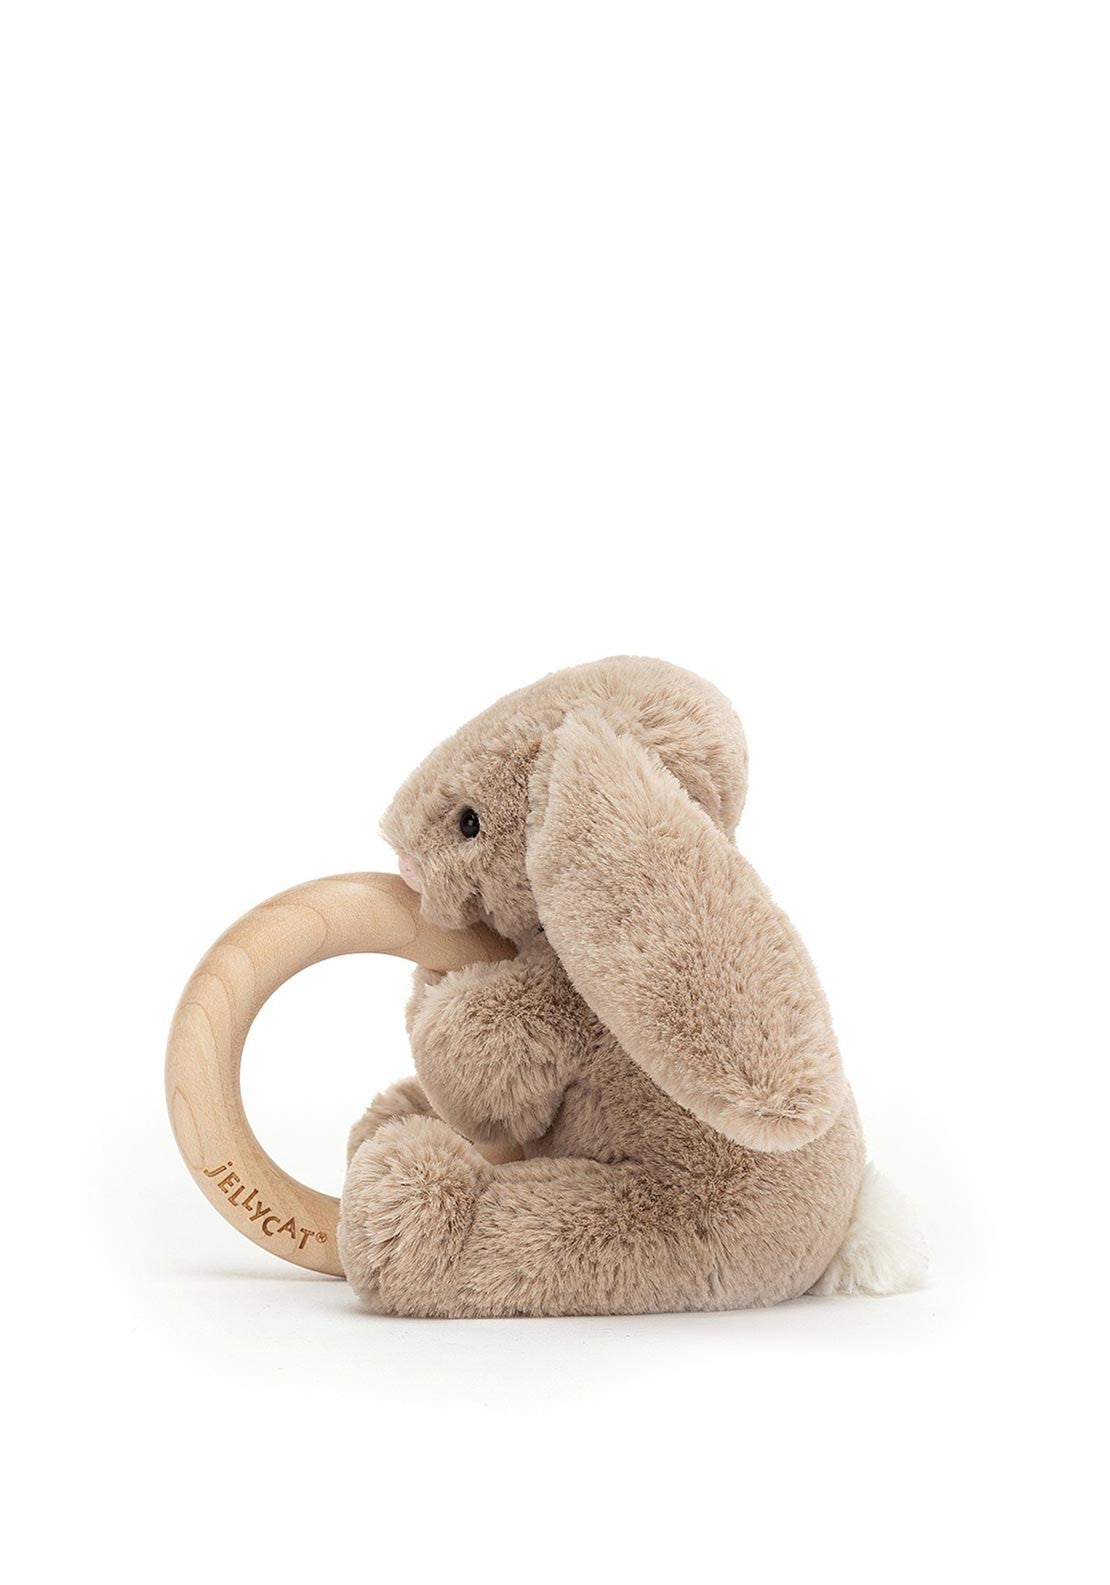 Jellycat Soft Toy - Bashful Beige Bunny Wooden Ring Toy (13cm tall)